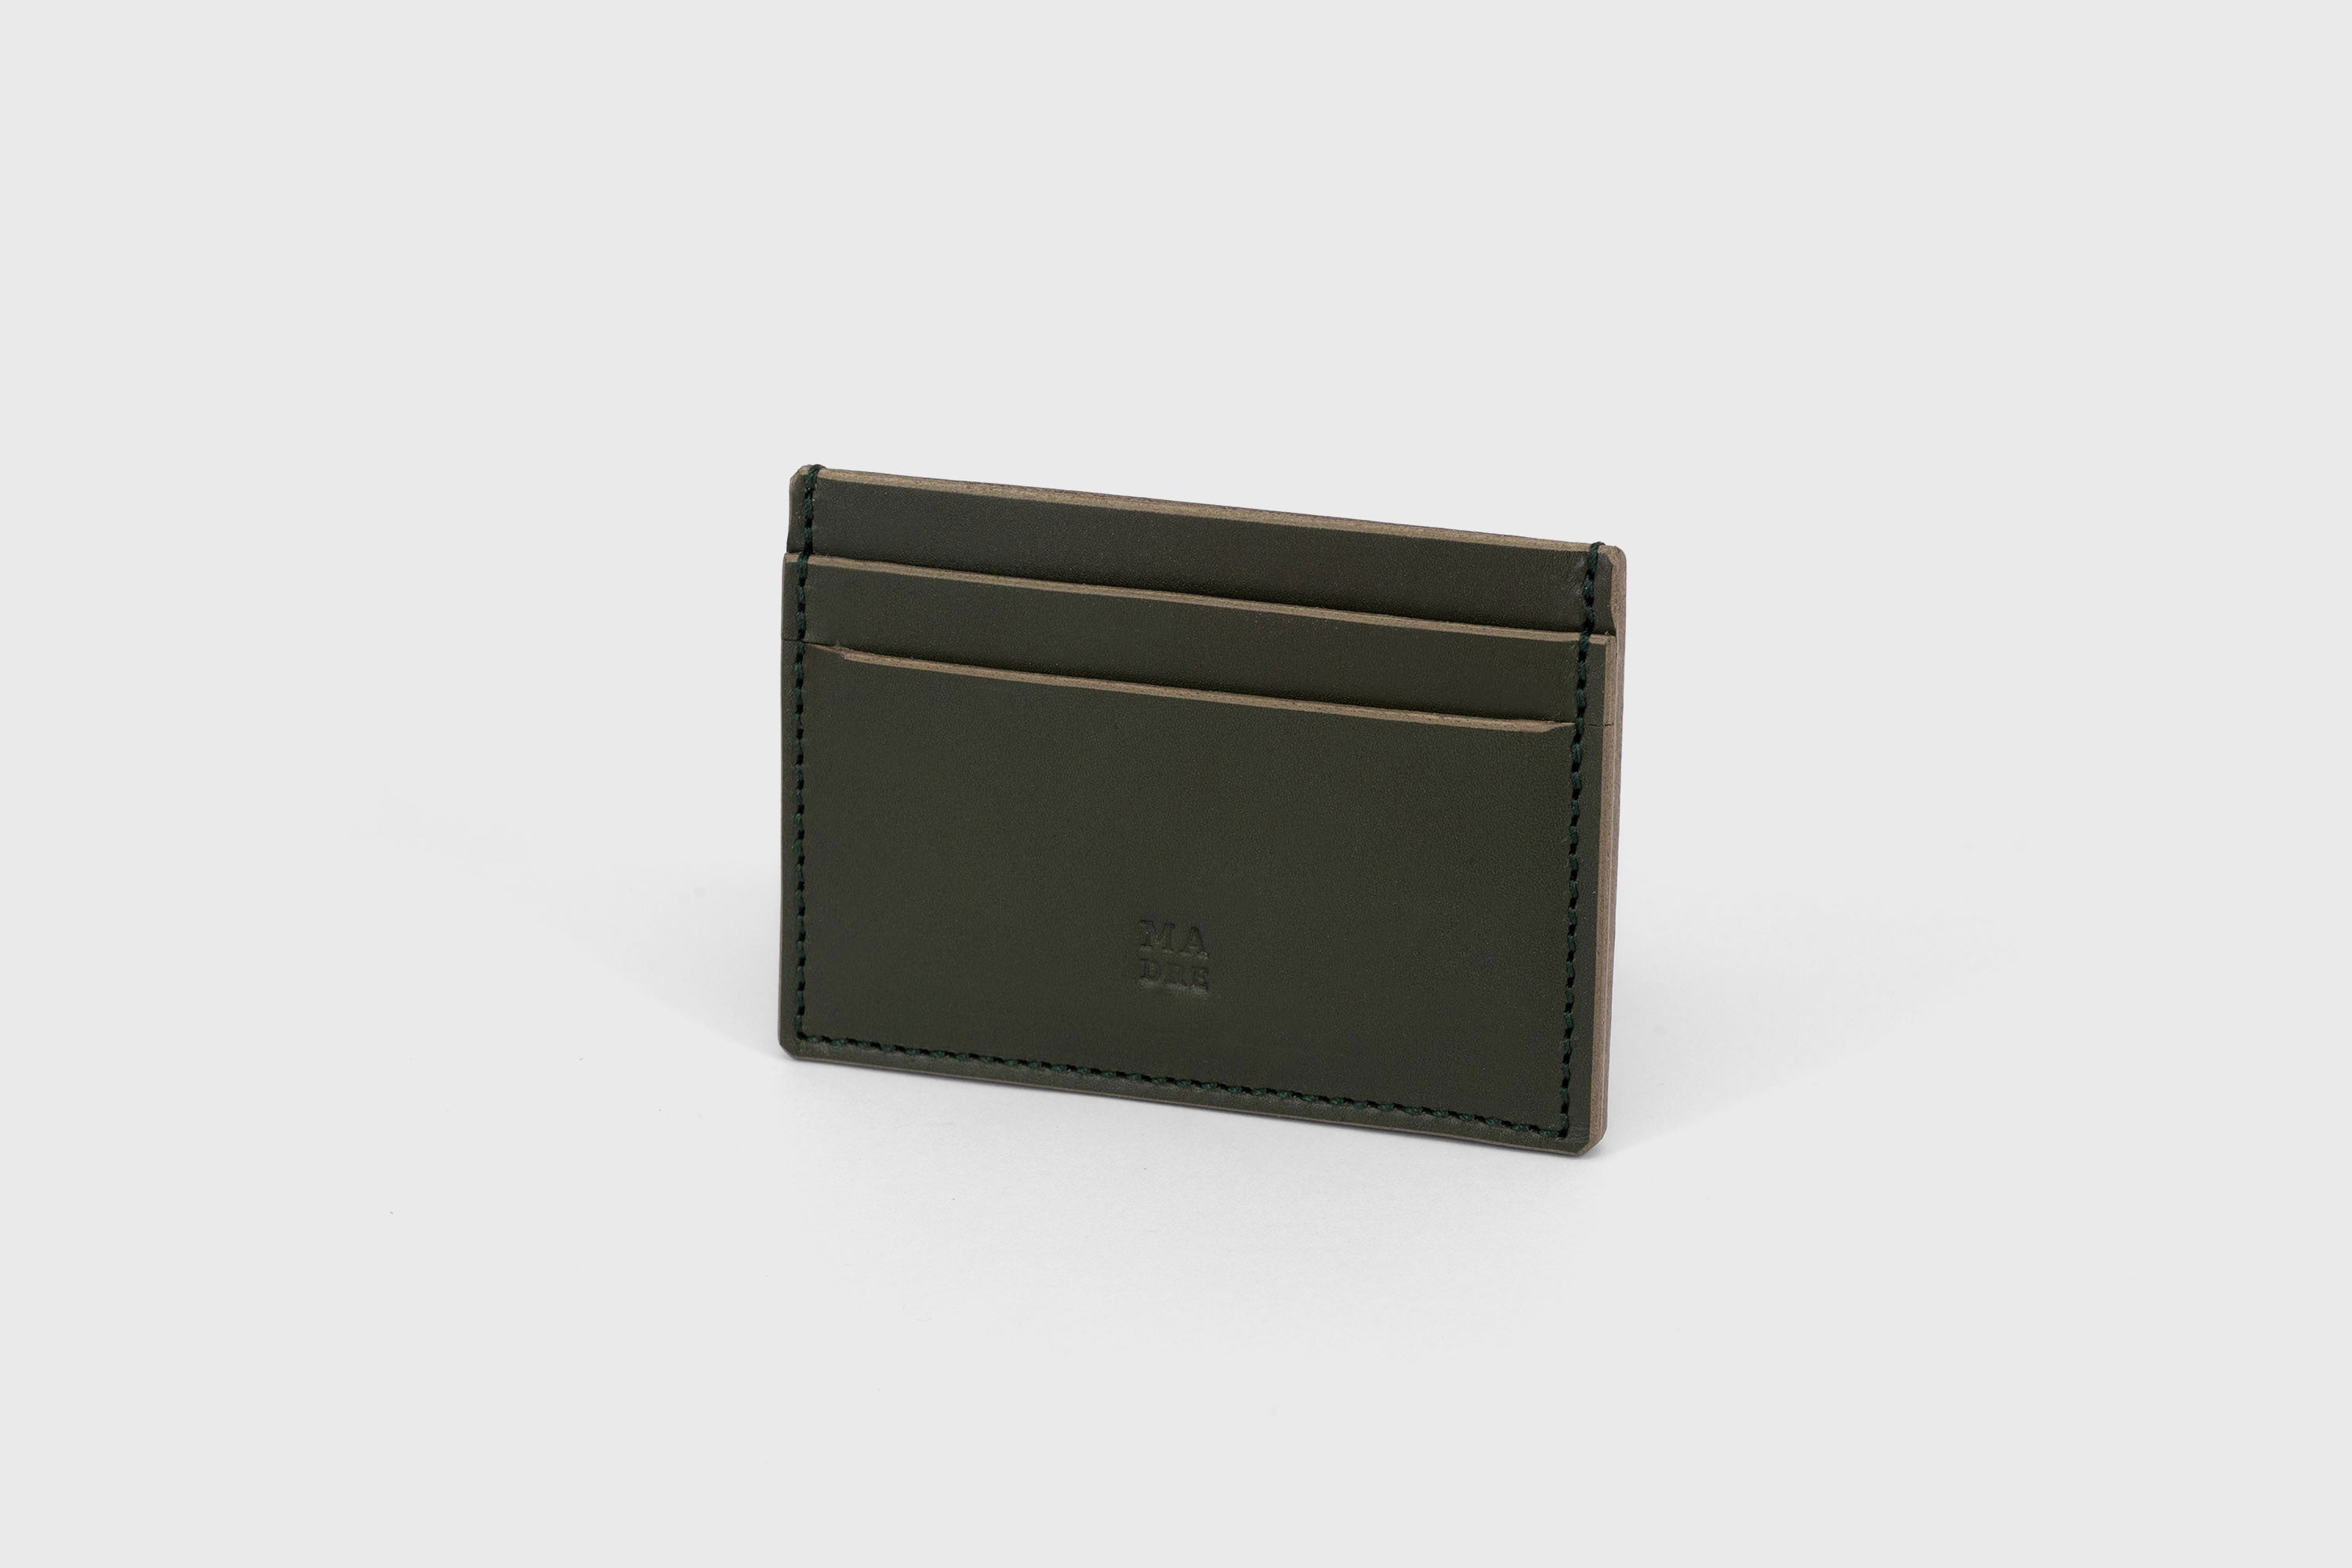 Credit Card Wallet Modern in Olive Green Leather Vachetta Vegetable Tanned Leather Handmade and Design by Atelier Madre Manuel Dreesmann Barcelona Spain